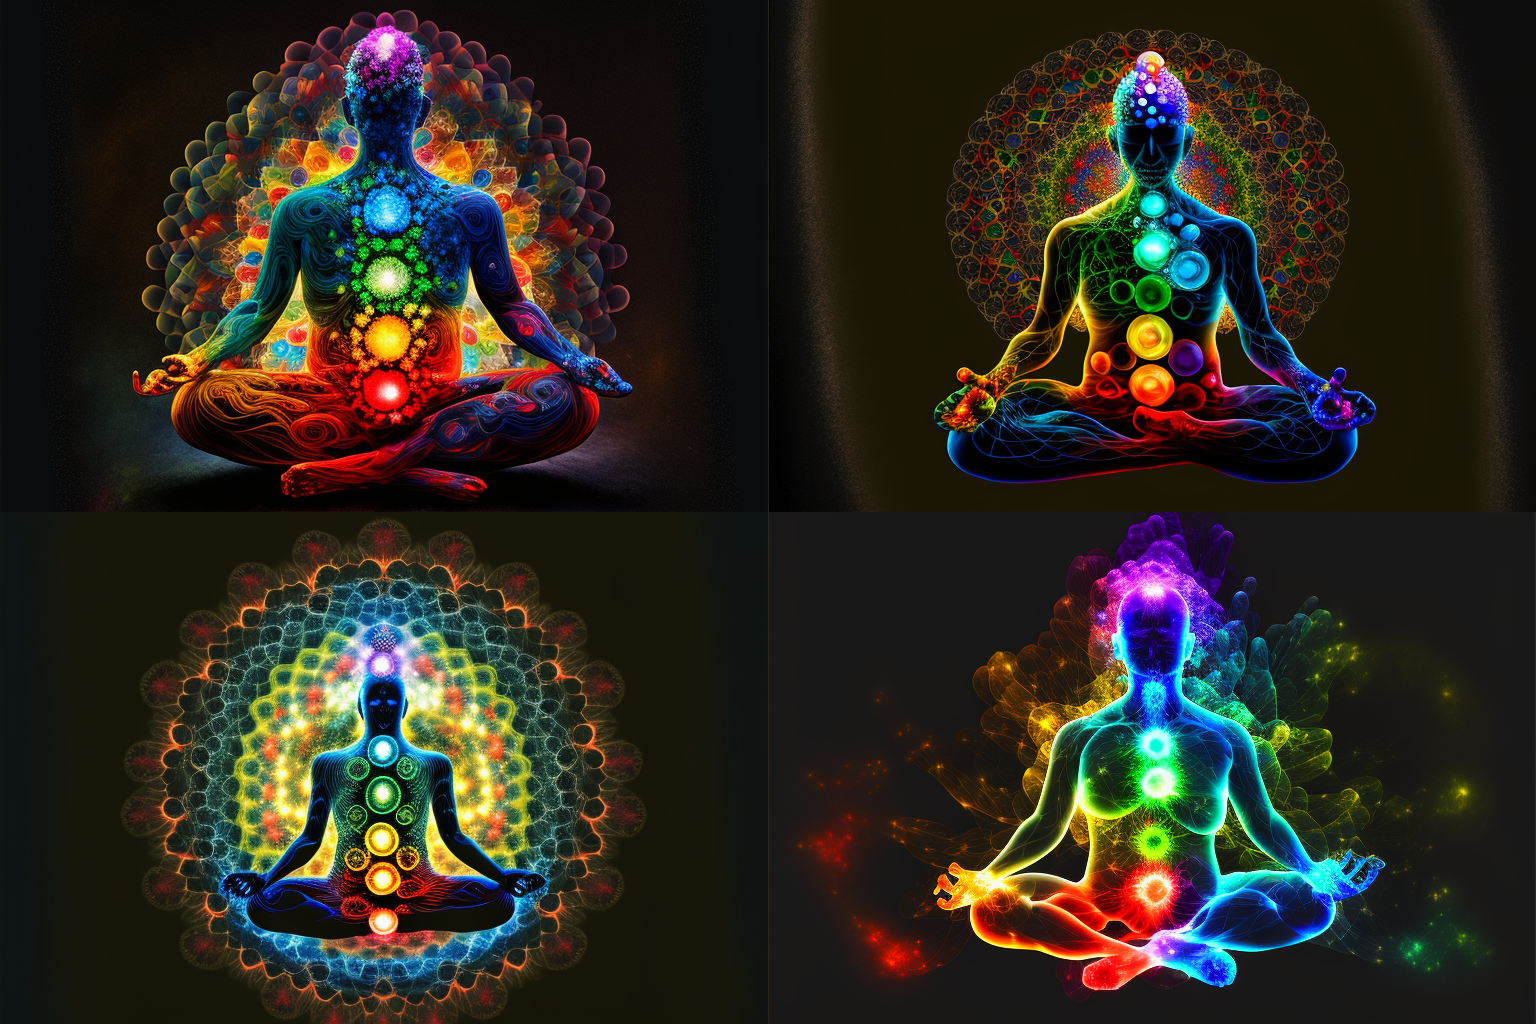 antjuan_energetic_being_sitting_in_lotus_position_while_meditat_fdc24be6-39ad-4a6b-bc98-ac0b25adbf0f.png